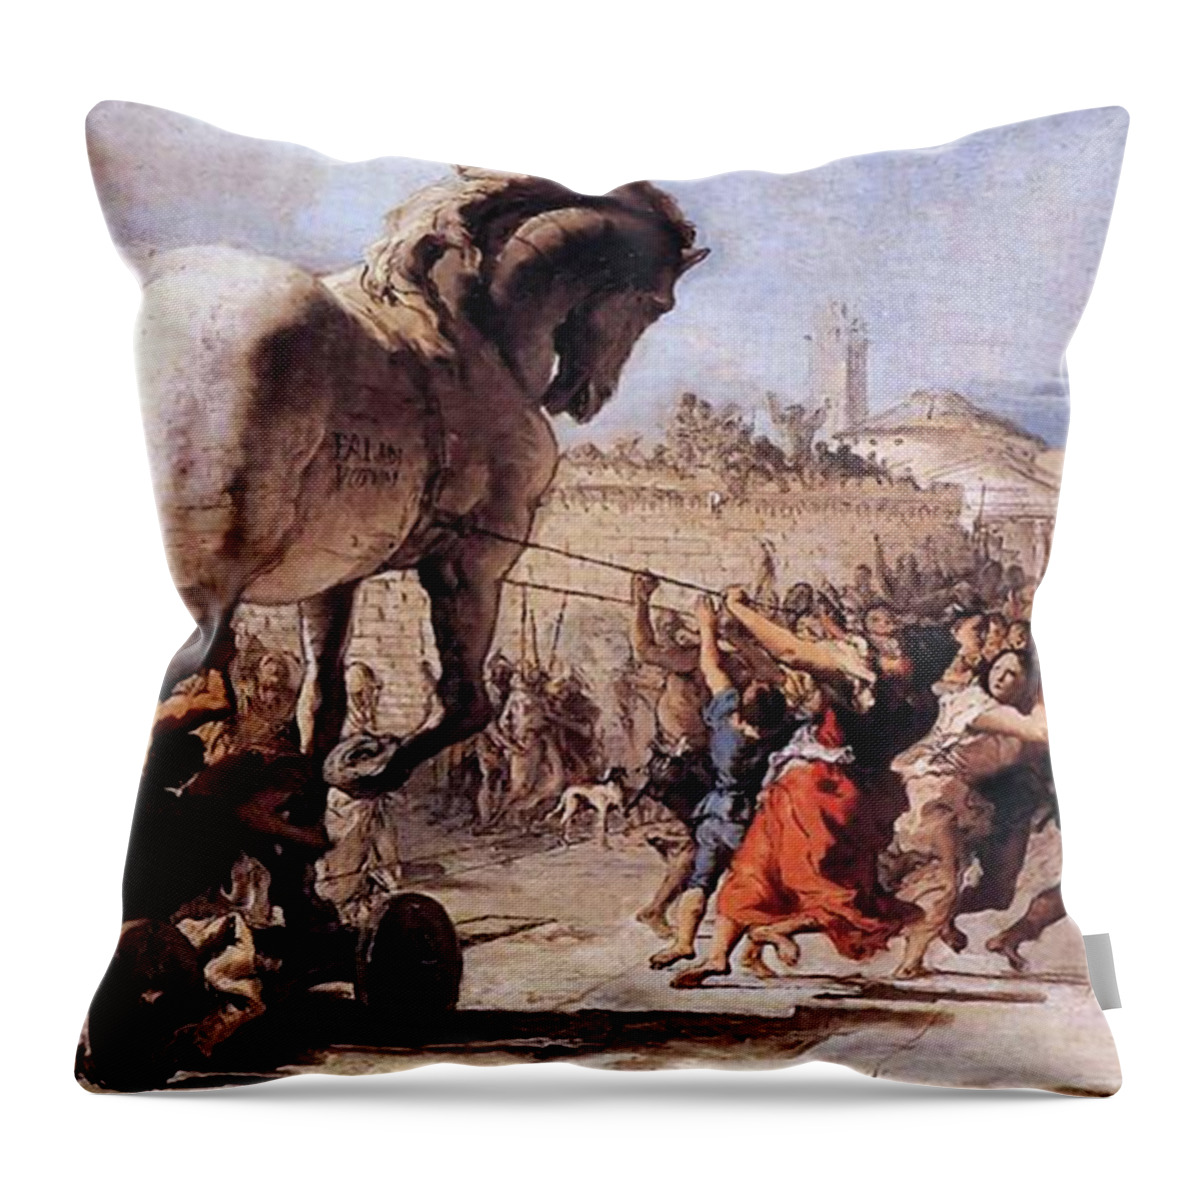 Procession Throw Pillow featuring the painting Procession of the Trojan Horse by Giovanni Tiepolo